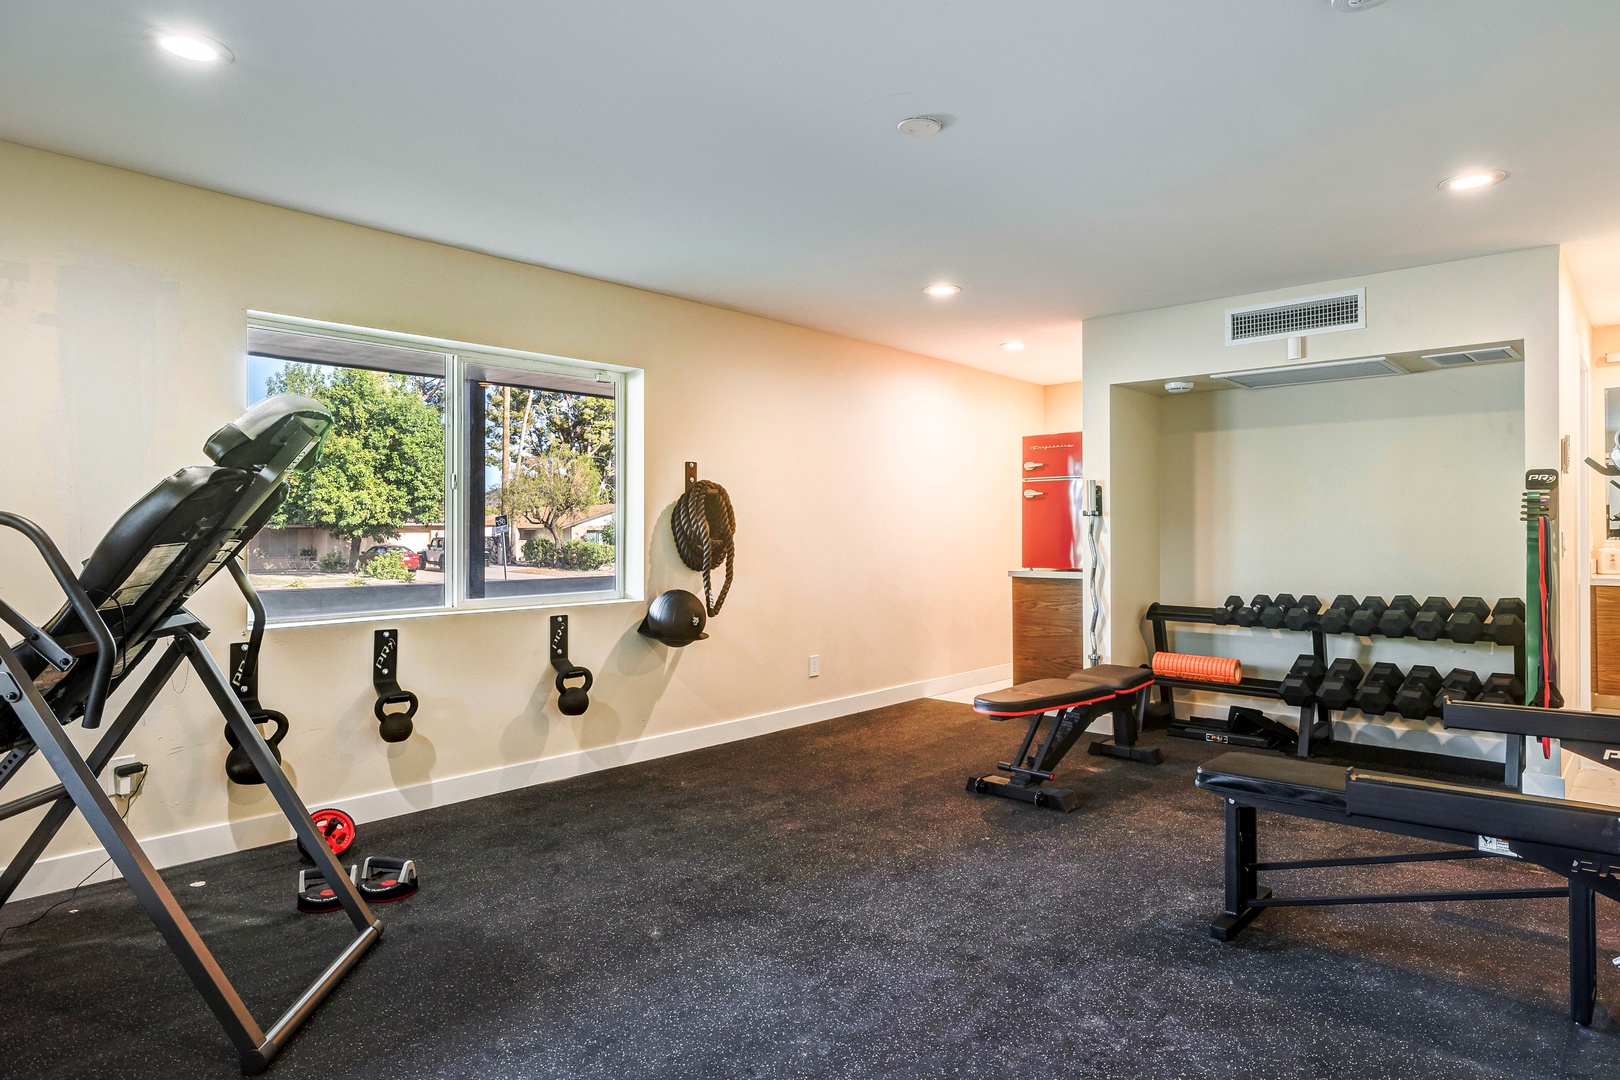 Fitness room complete with a variety of exercise equipment